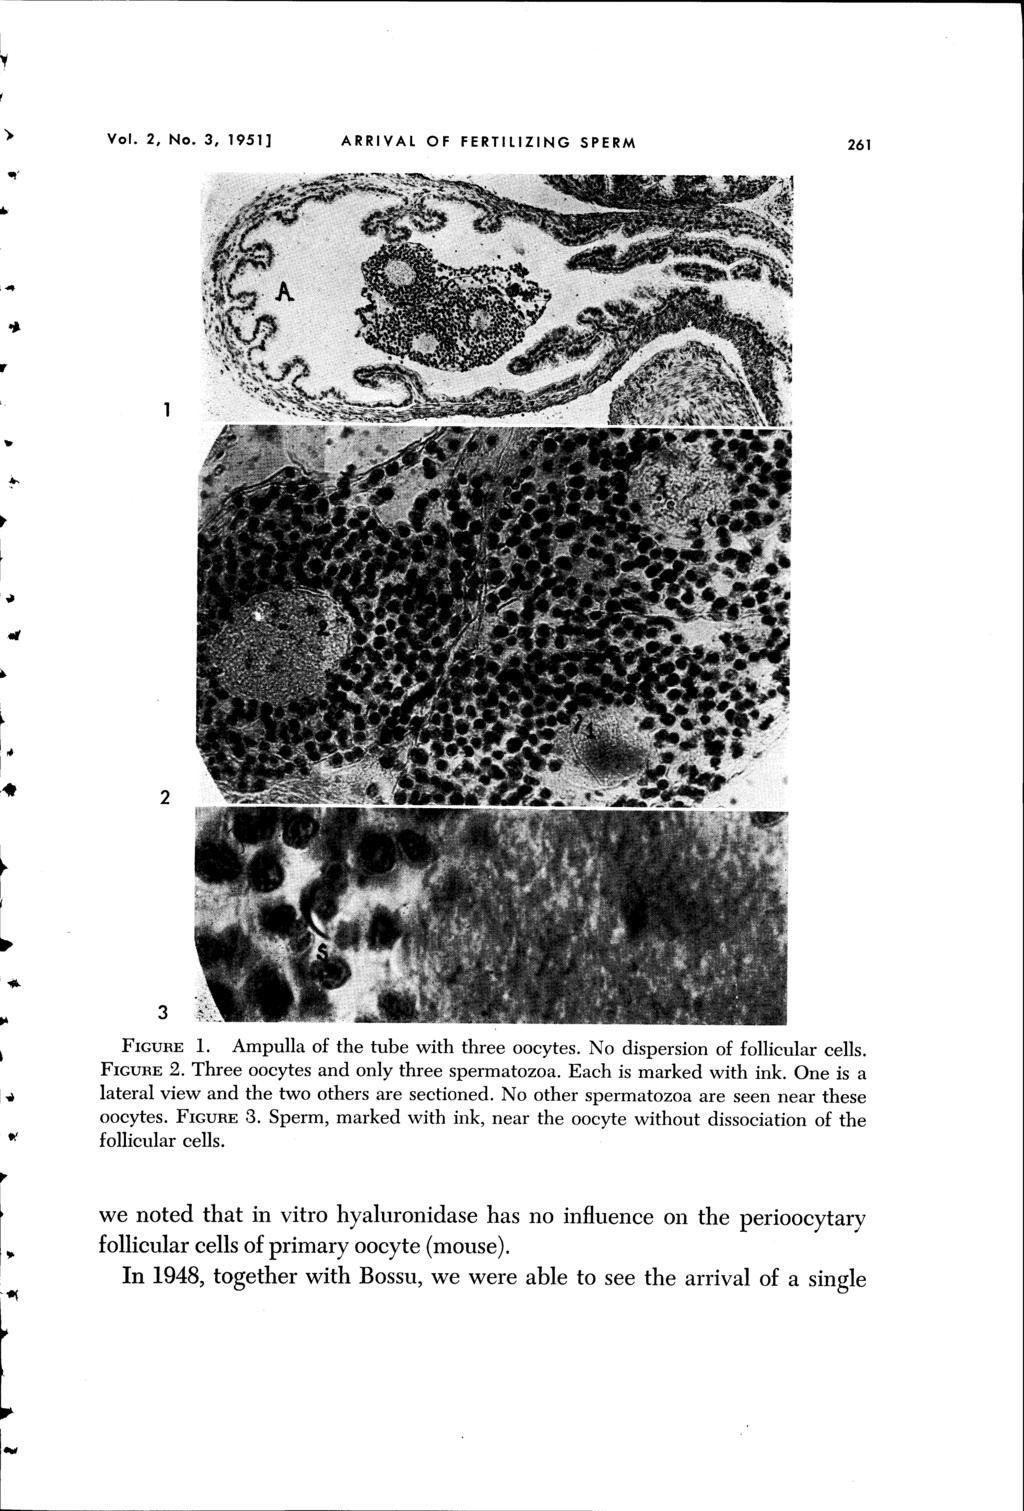 Vol. 2, No.3, 1951] ARRIVAL OF FERTILIZING SPERM 261. ~ l. 2 3 1. Ampulla of the tube with three oocytes. No dispersion of follicular cells. 2. Three oocytes and only three spermatozoa.